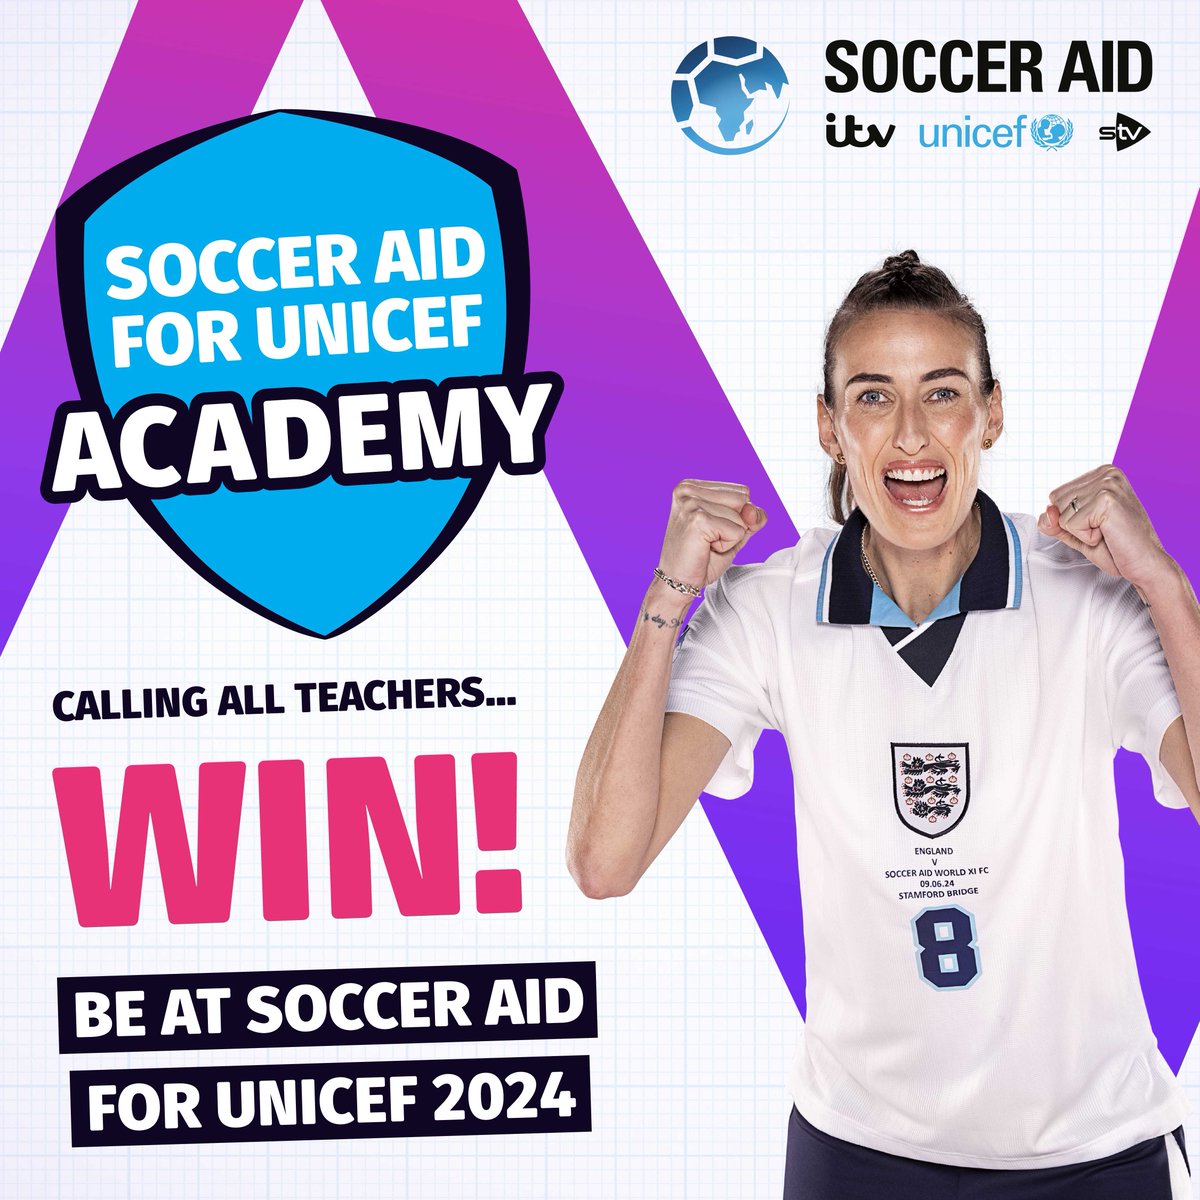 Sign up to the Soccer Aid for UNICEF Academy to enter the Mascot Design Competition! One student could be a winner and at Stamford Bridge on Sunday 9 June 2024. For more info go to socceraid.org.uk/schools 🏆 T&Cs apply